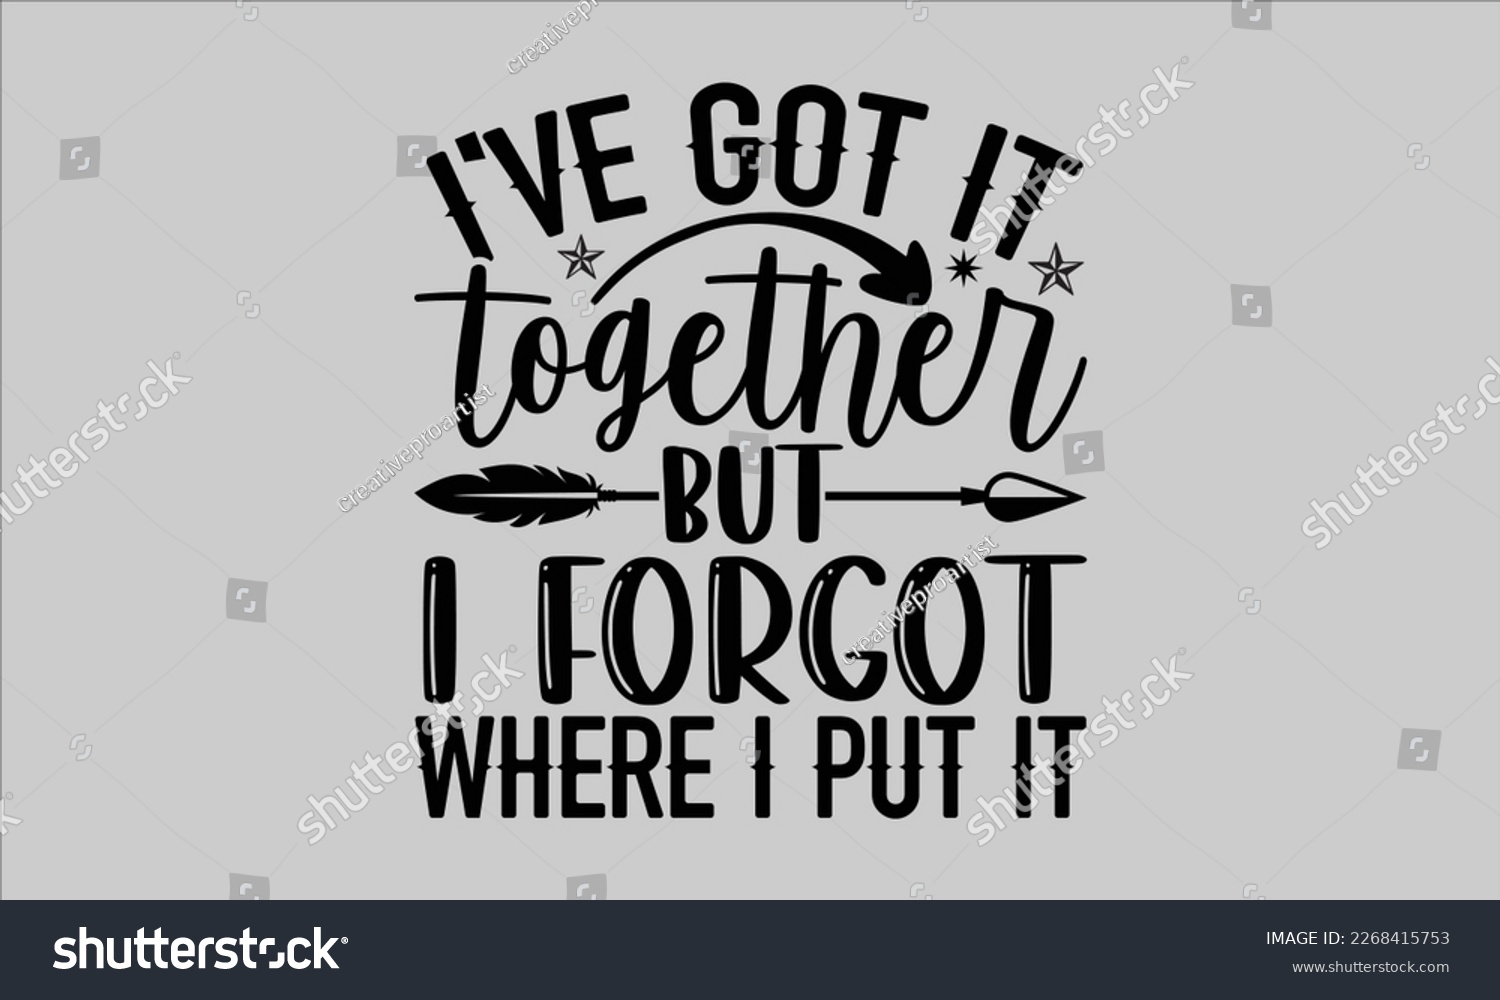 SVG of I've got it together but I forgot where I put it- Piano t- shirt design, Template Vector and Sports illustration, lettering on a white background for svg Cutting Machine, posters mog, bags eps 10. svg